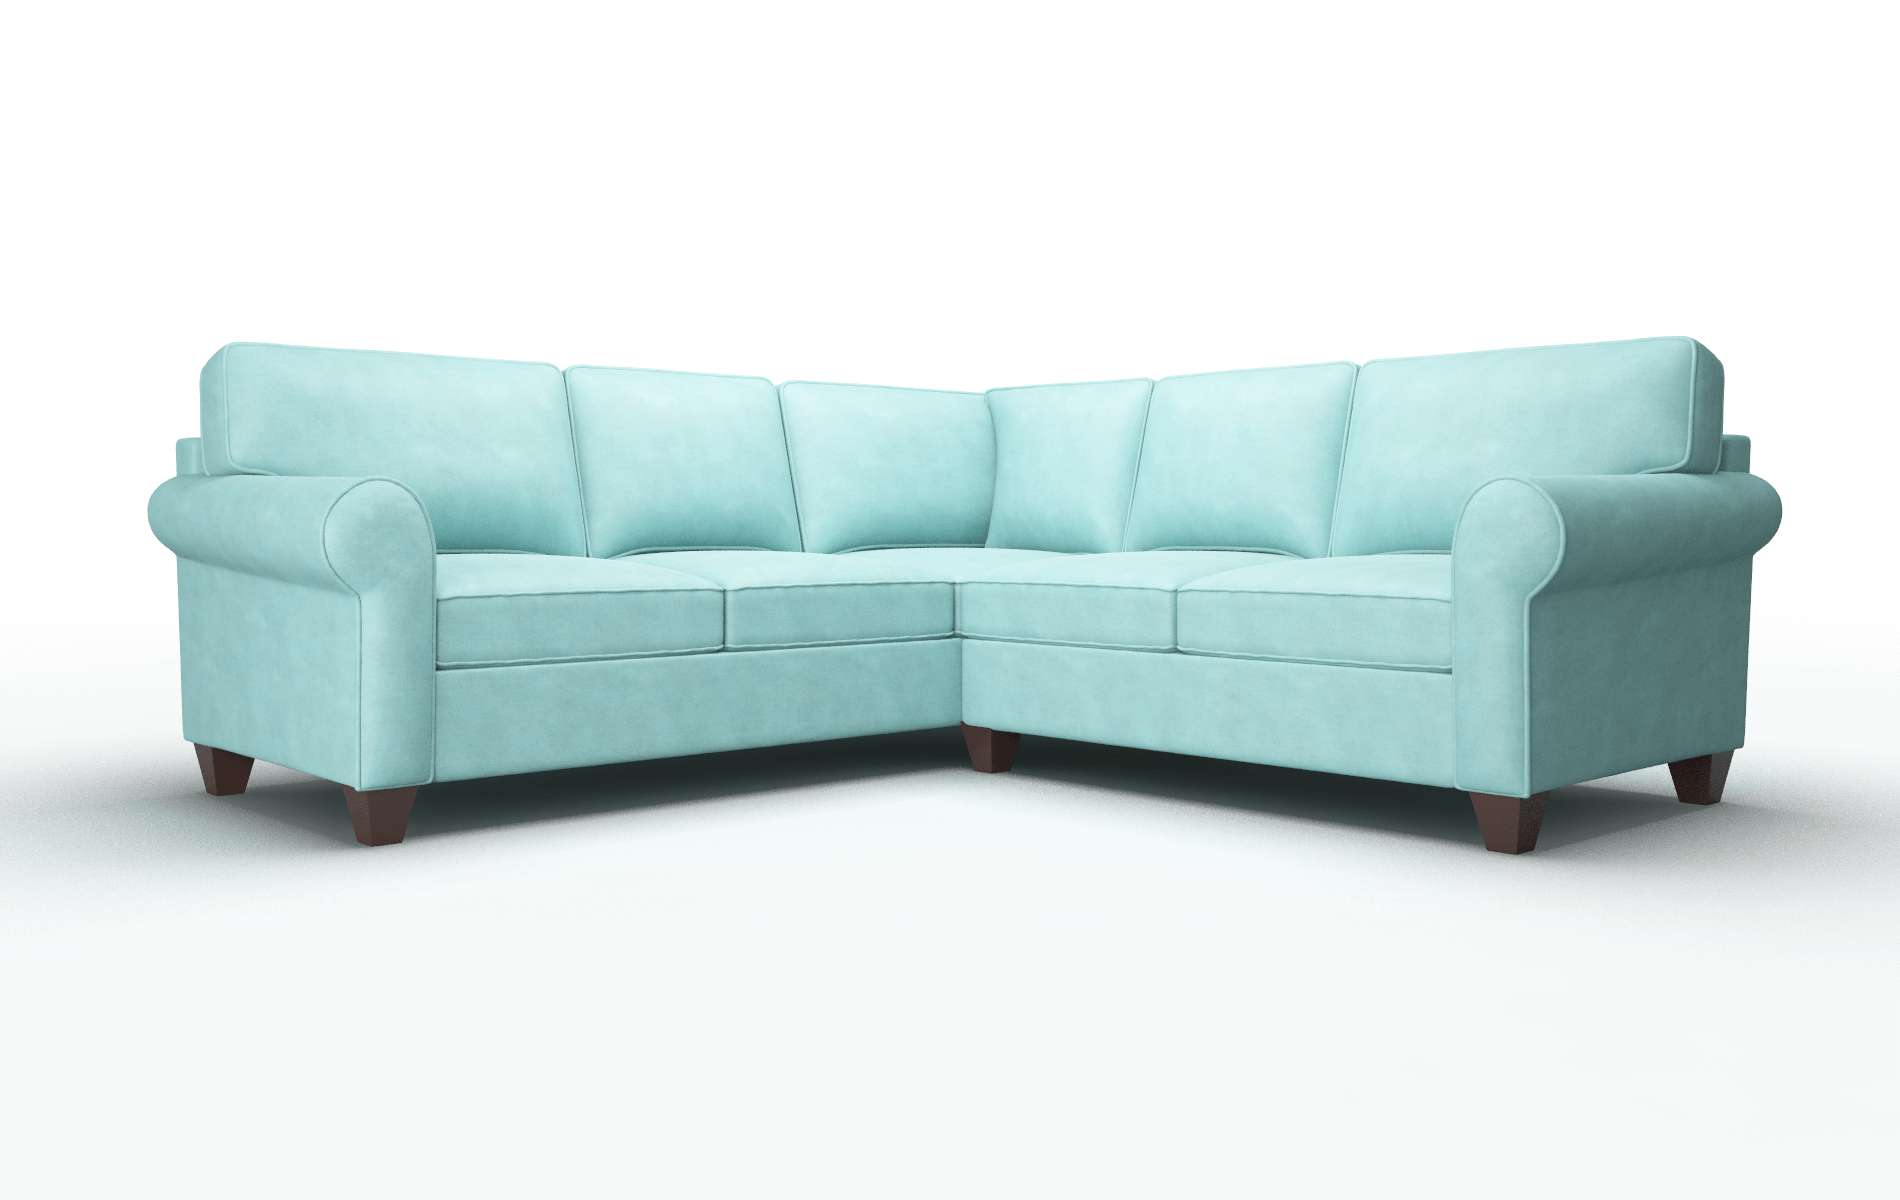 Augusta Curious Turquoise Sectional espresso legs